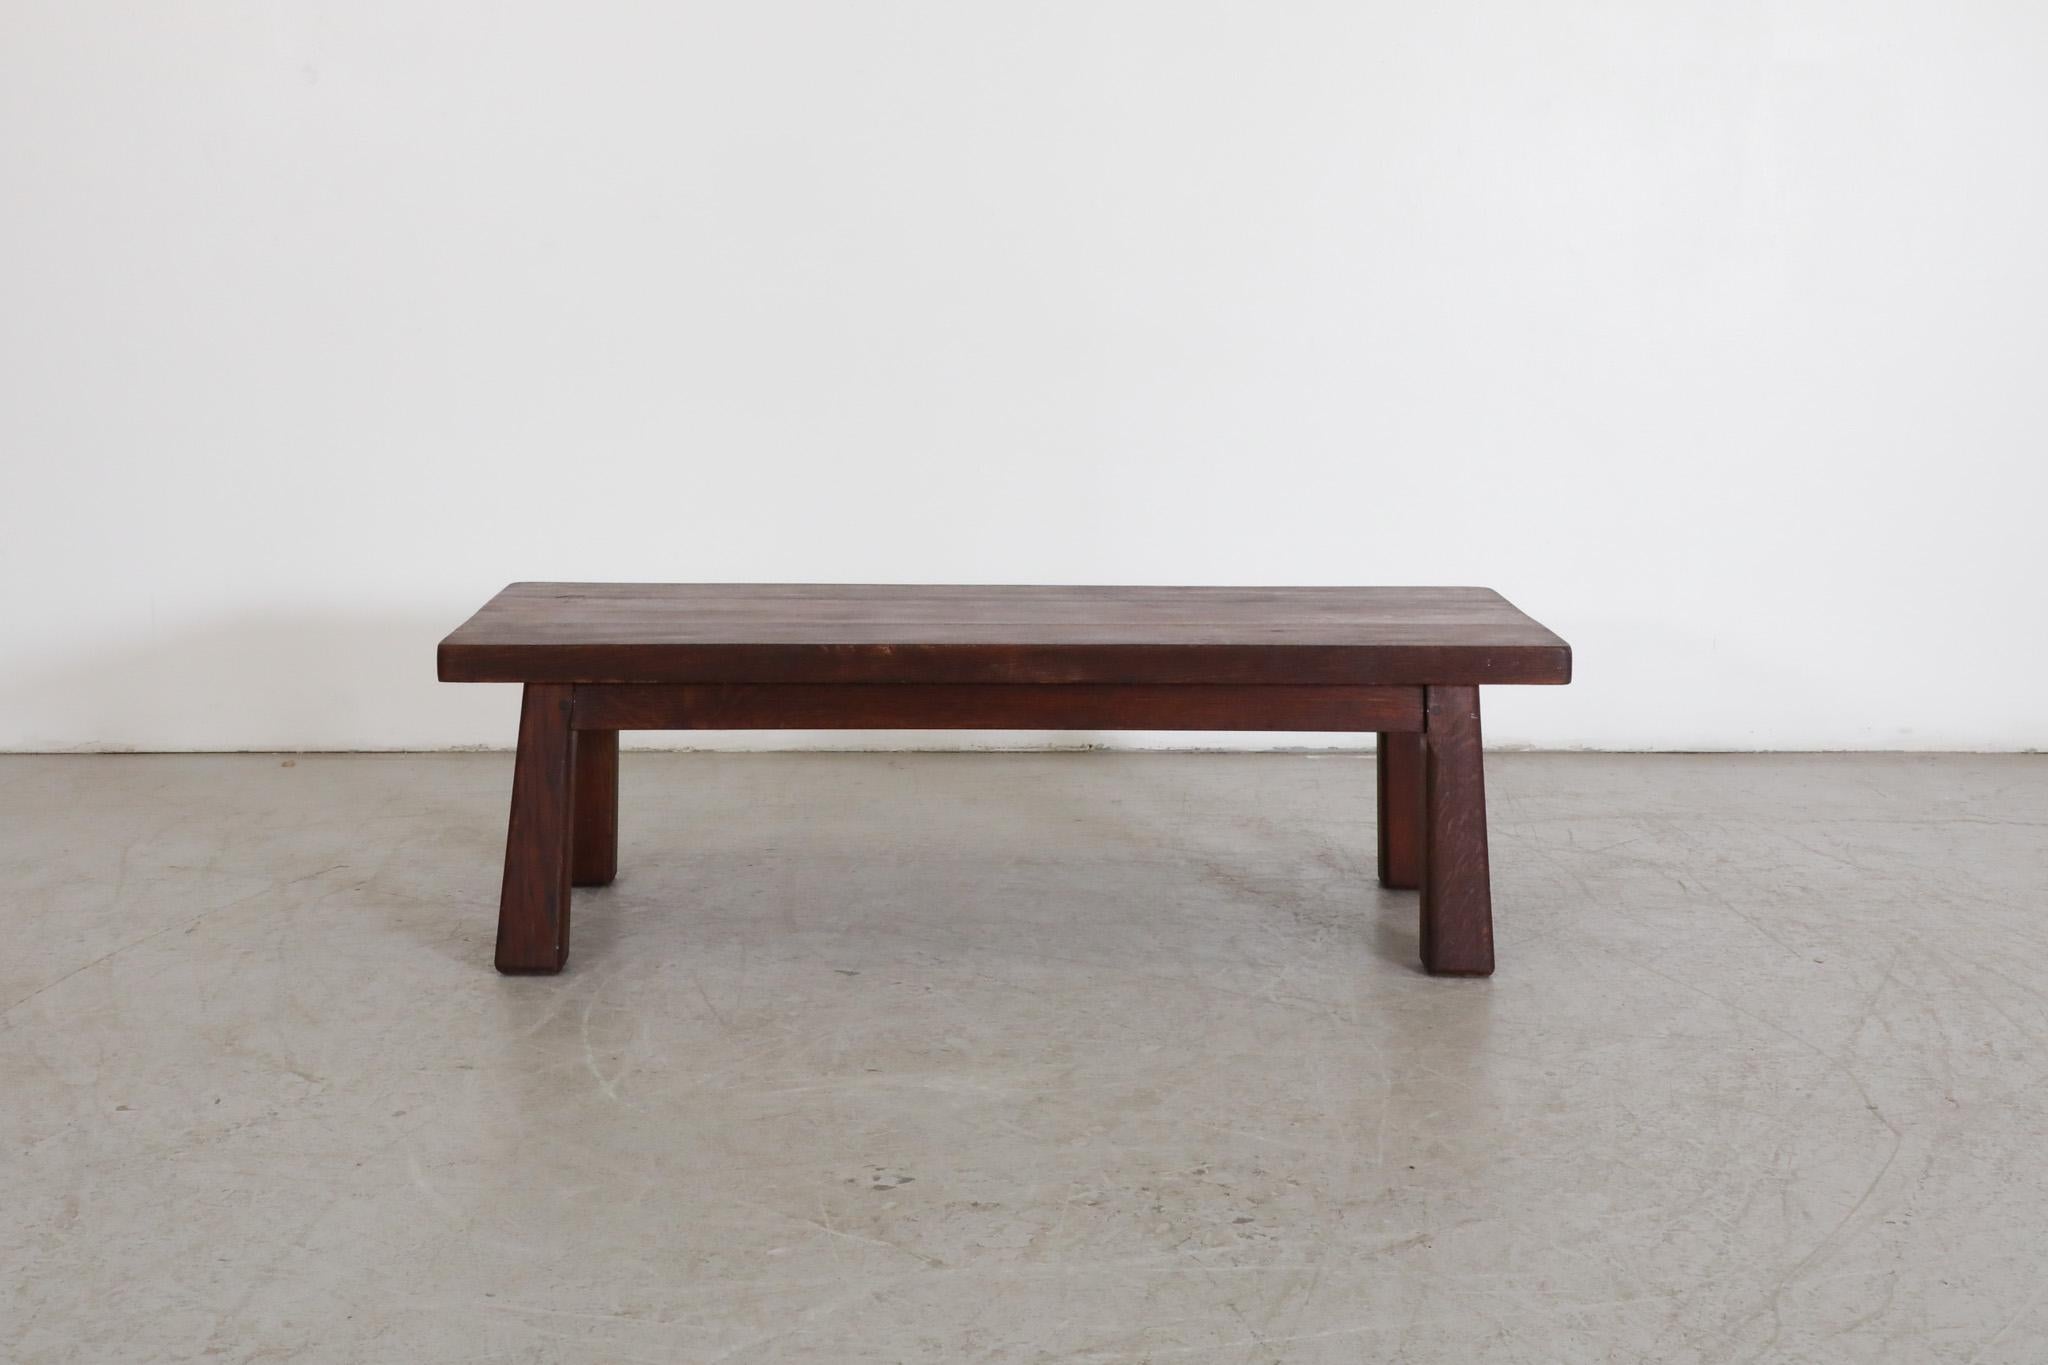 Brutalist, Pierre Chapo inspired, Mid Century coffee table or bench made from solid, dark stained oak. In original condition with visible wear, including some natural cracking. Wear is consistent with its age and use. Another similar lighter table